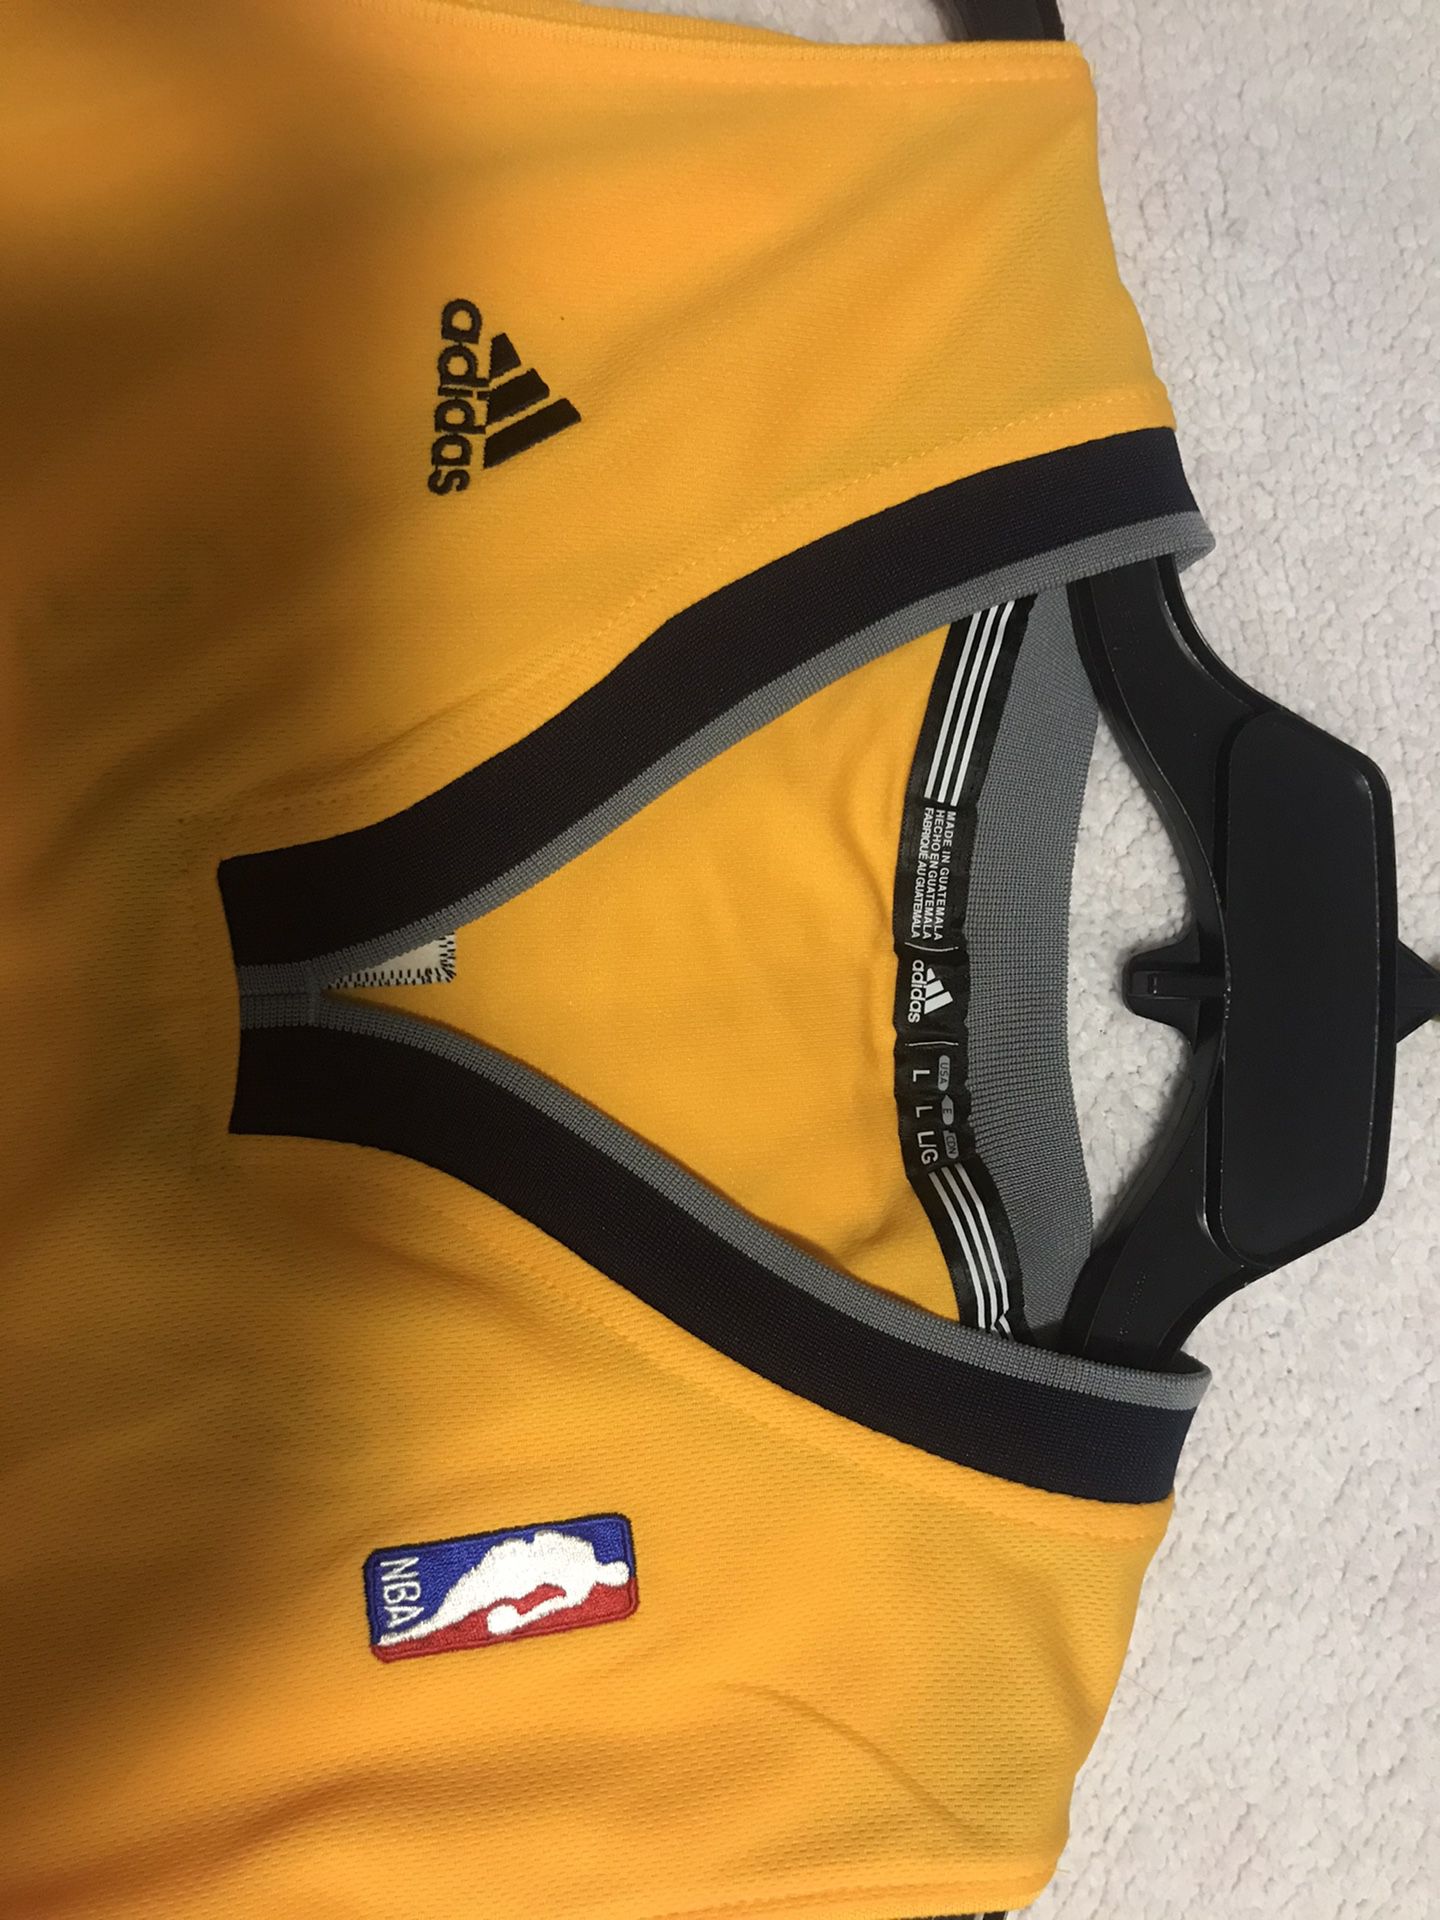 Indiana Pacers Paul George Jersey for Sale in Scottsdale, AZ - OfferUp